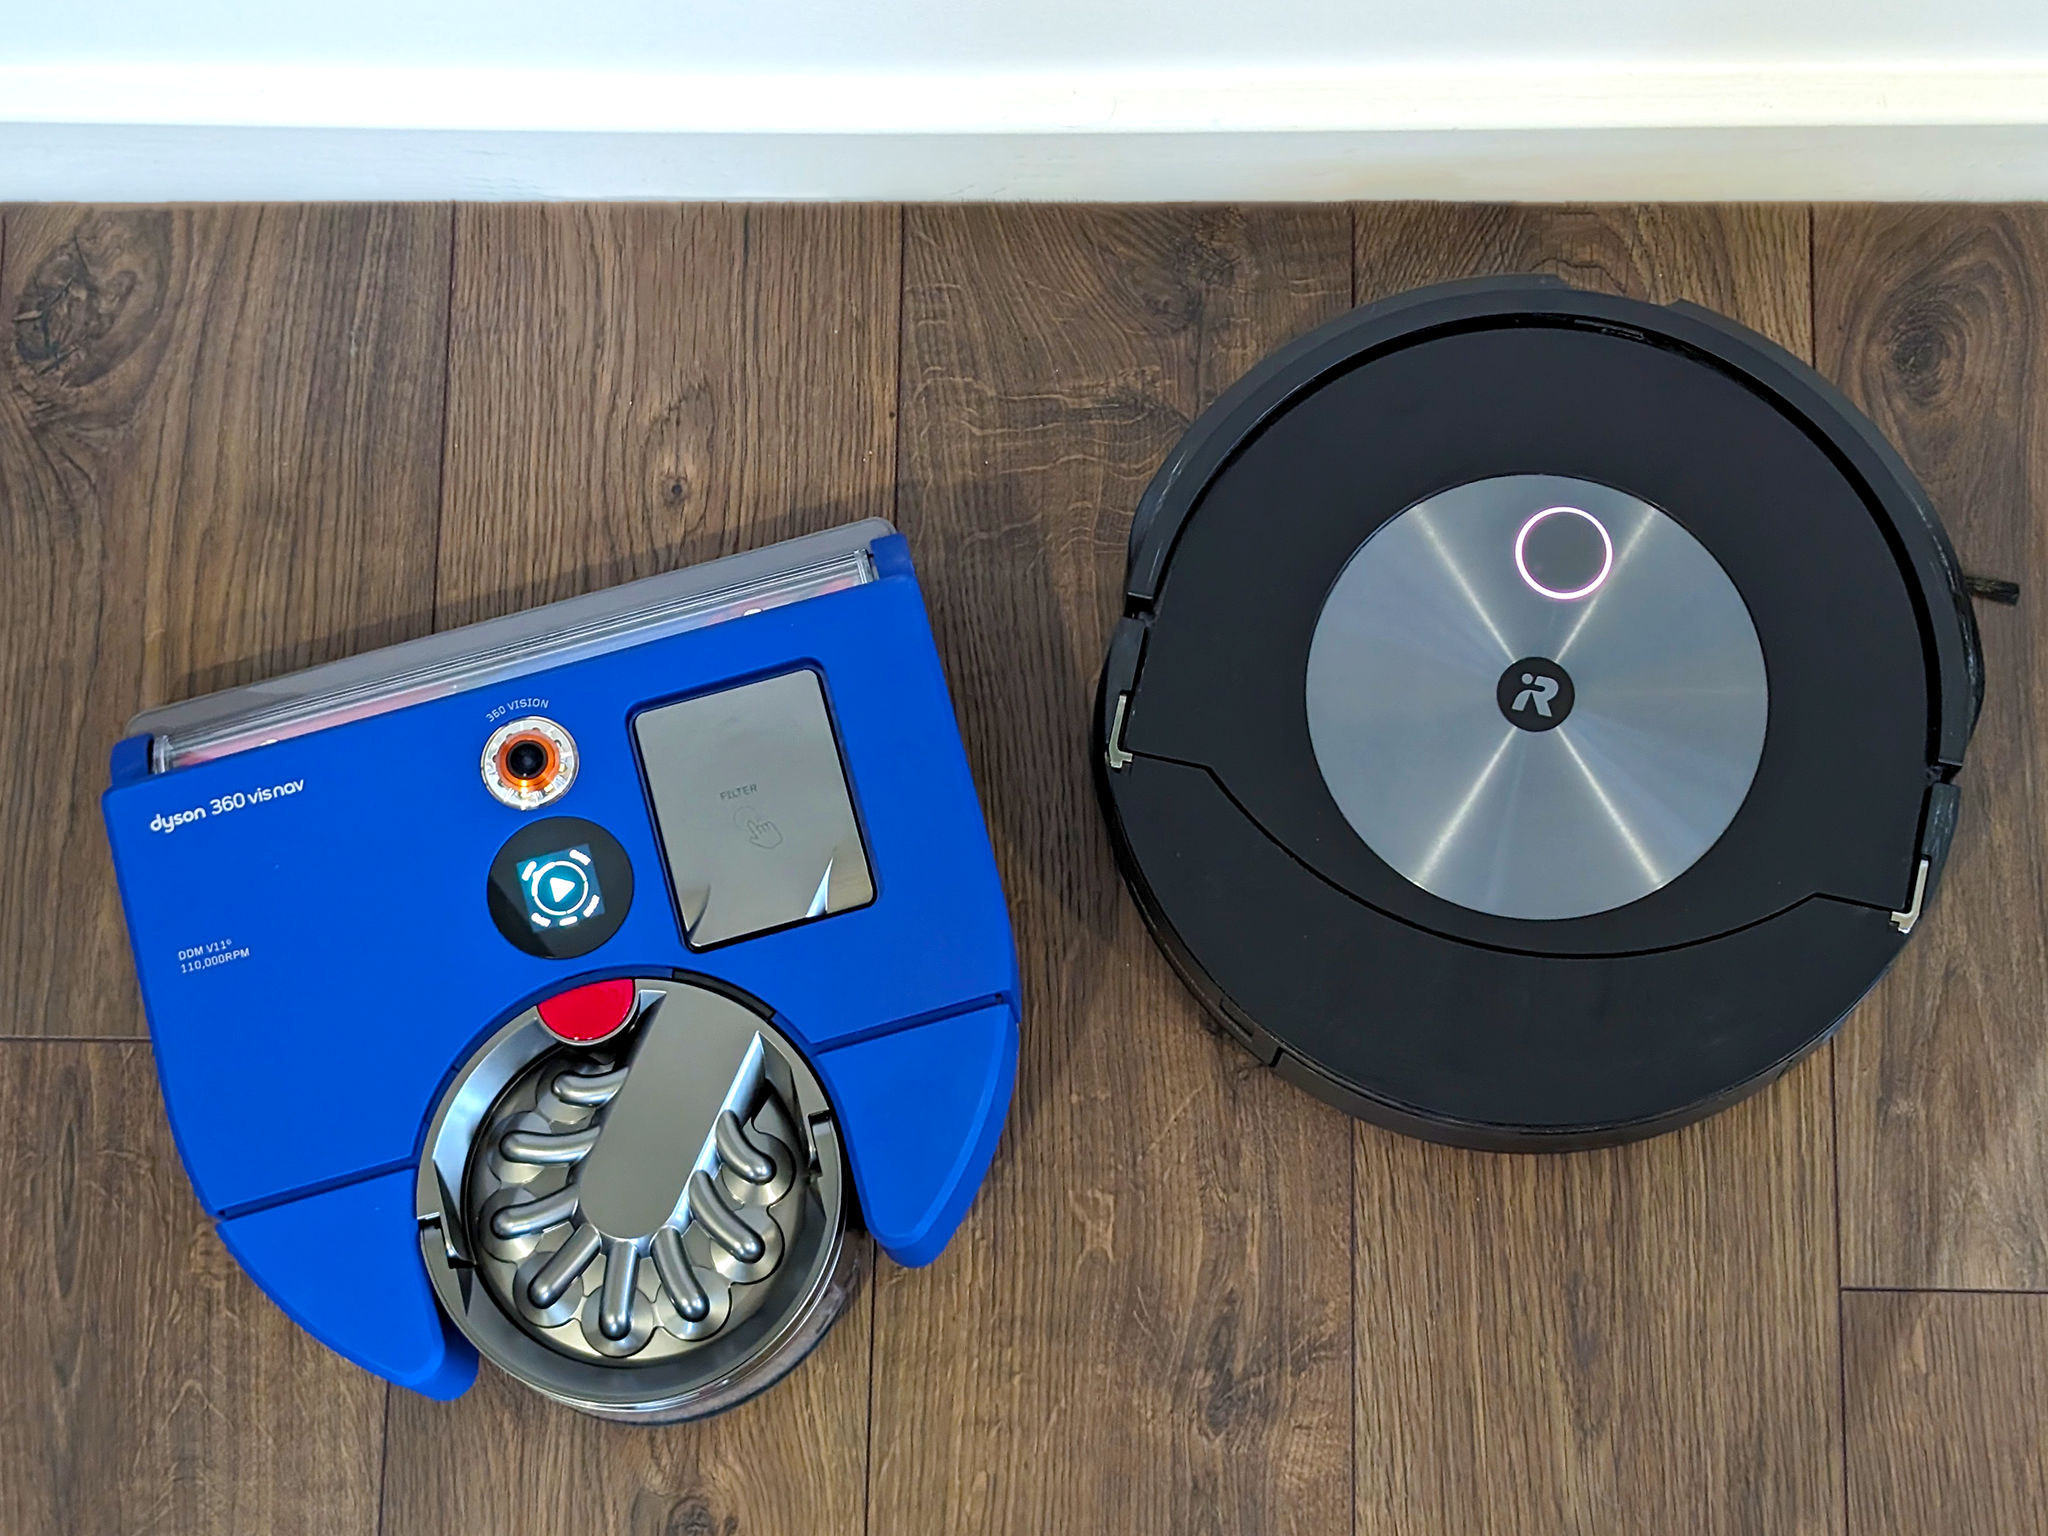 A selection of the robot vacuum cleaners we tested for this review